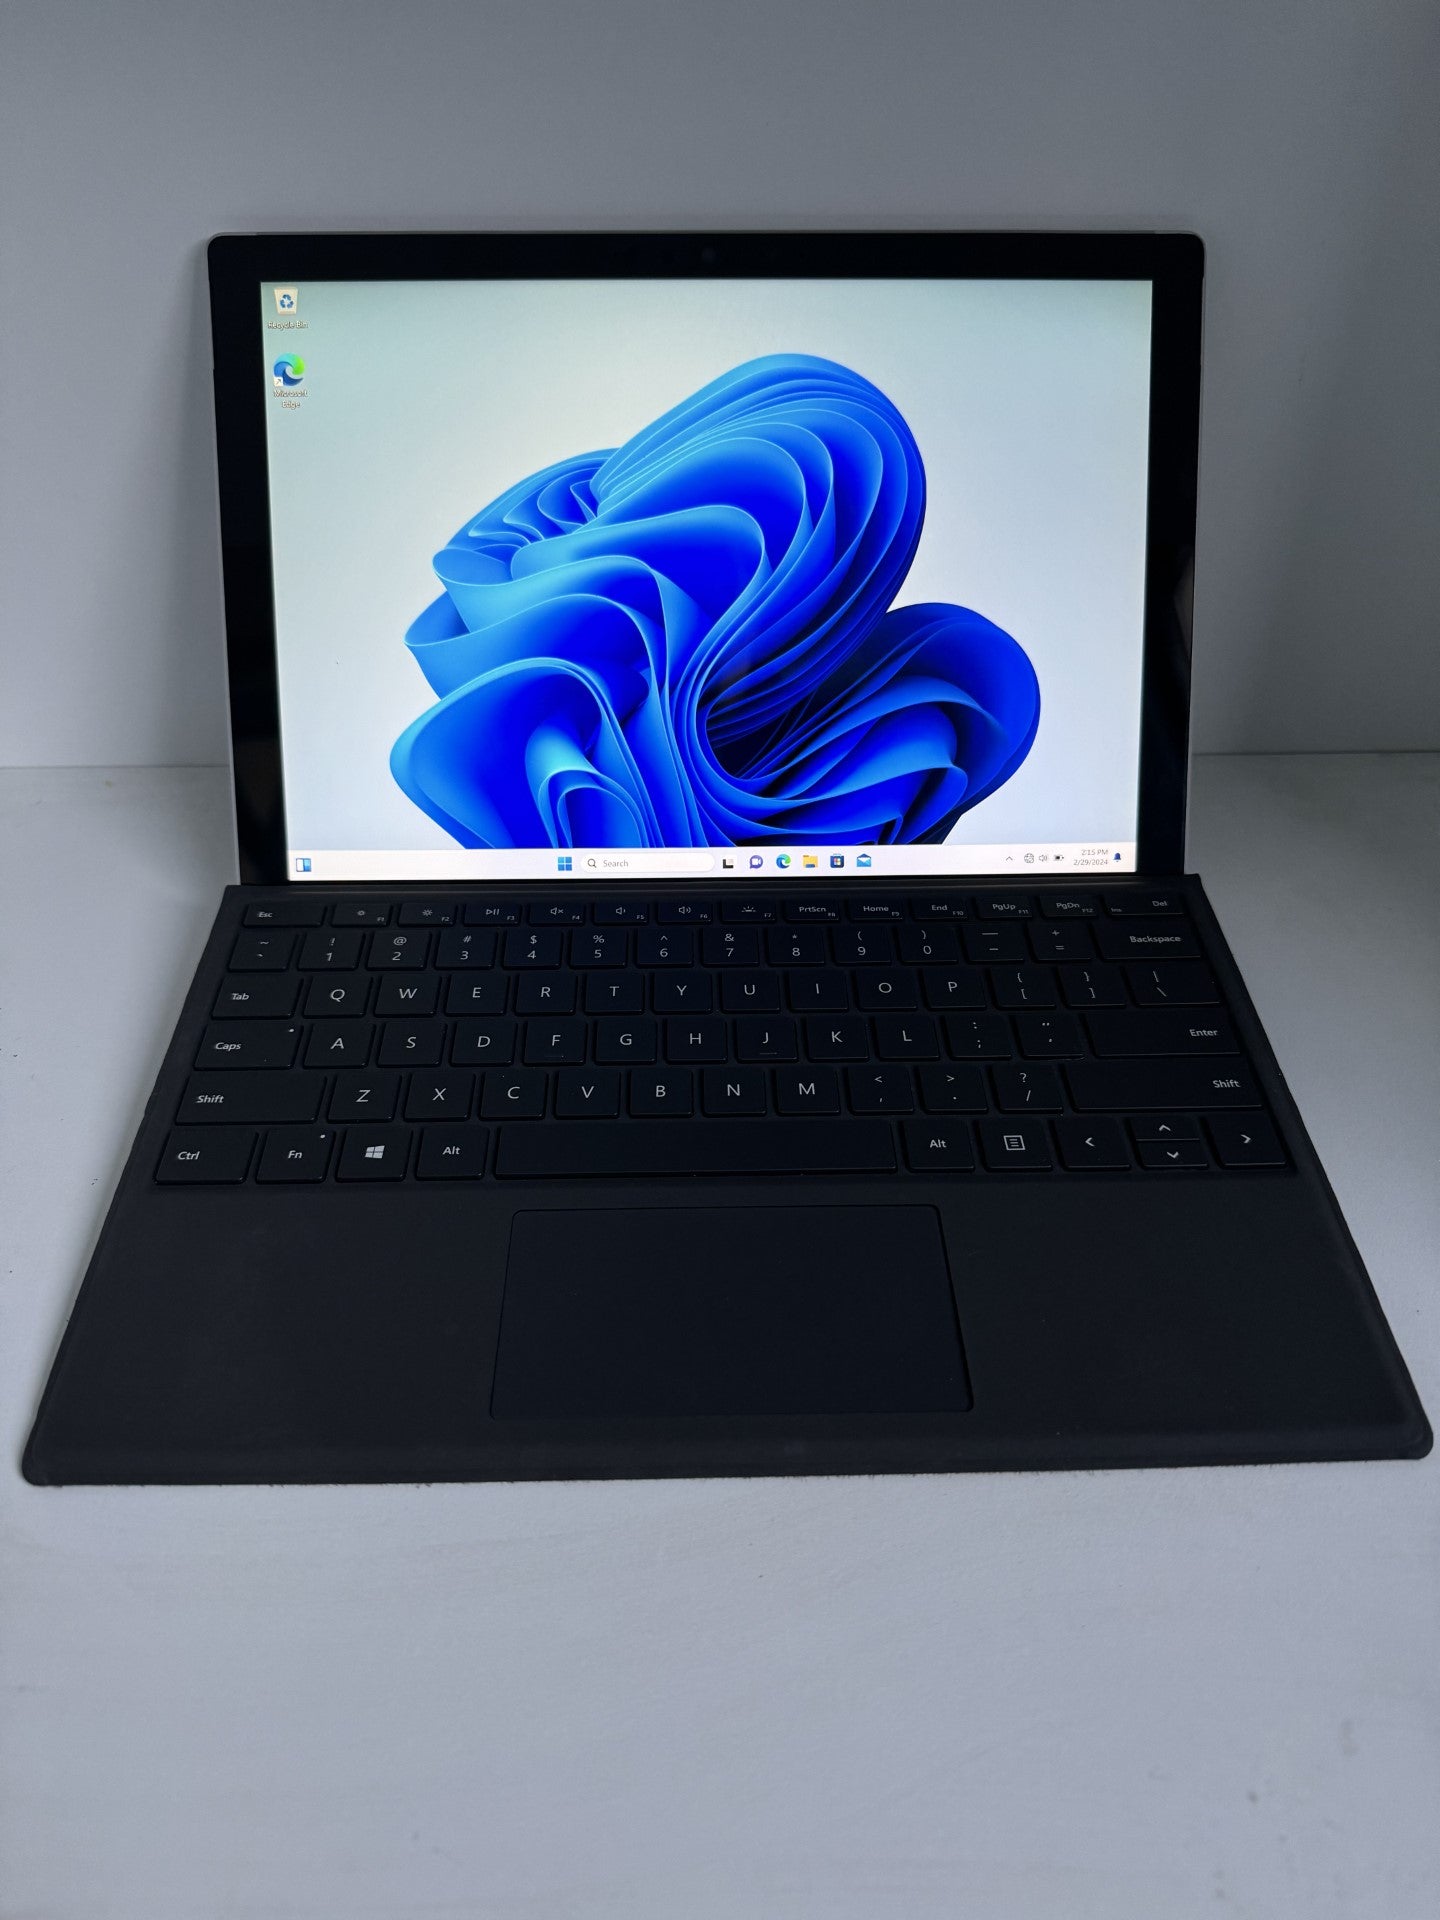 Microsoft Surface Pro 6 (Intel Core i5, 8GB RAM, 128GB) Used Excellent condition Including Keyboard , New Power adapter and Windows 11 Pro